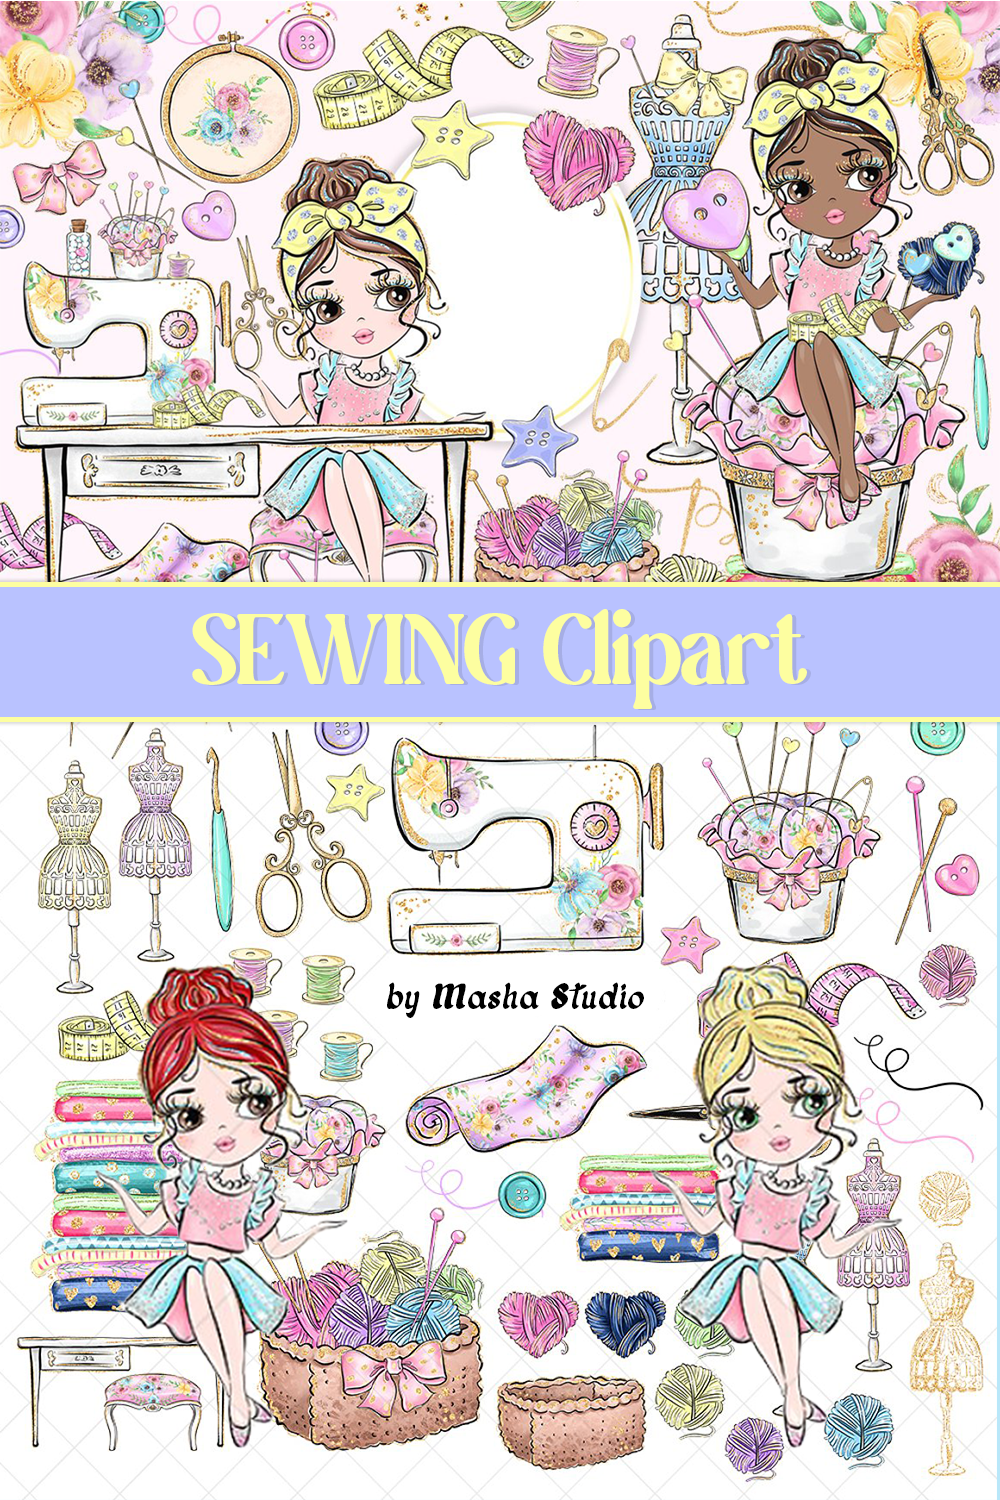 Sewing clipart of pinterest.